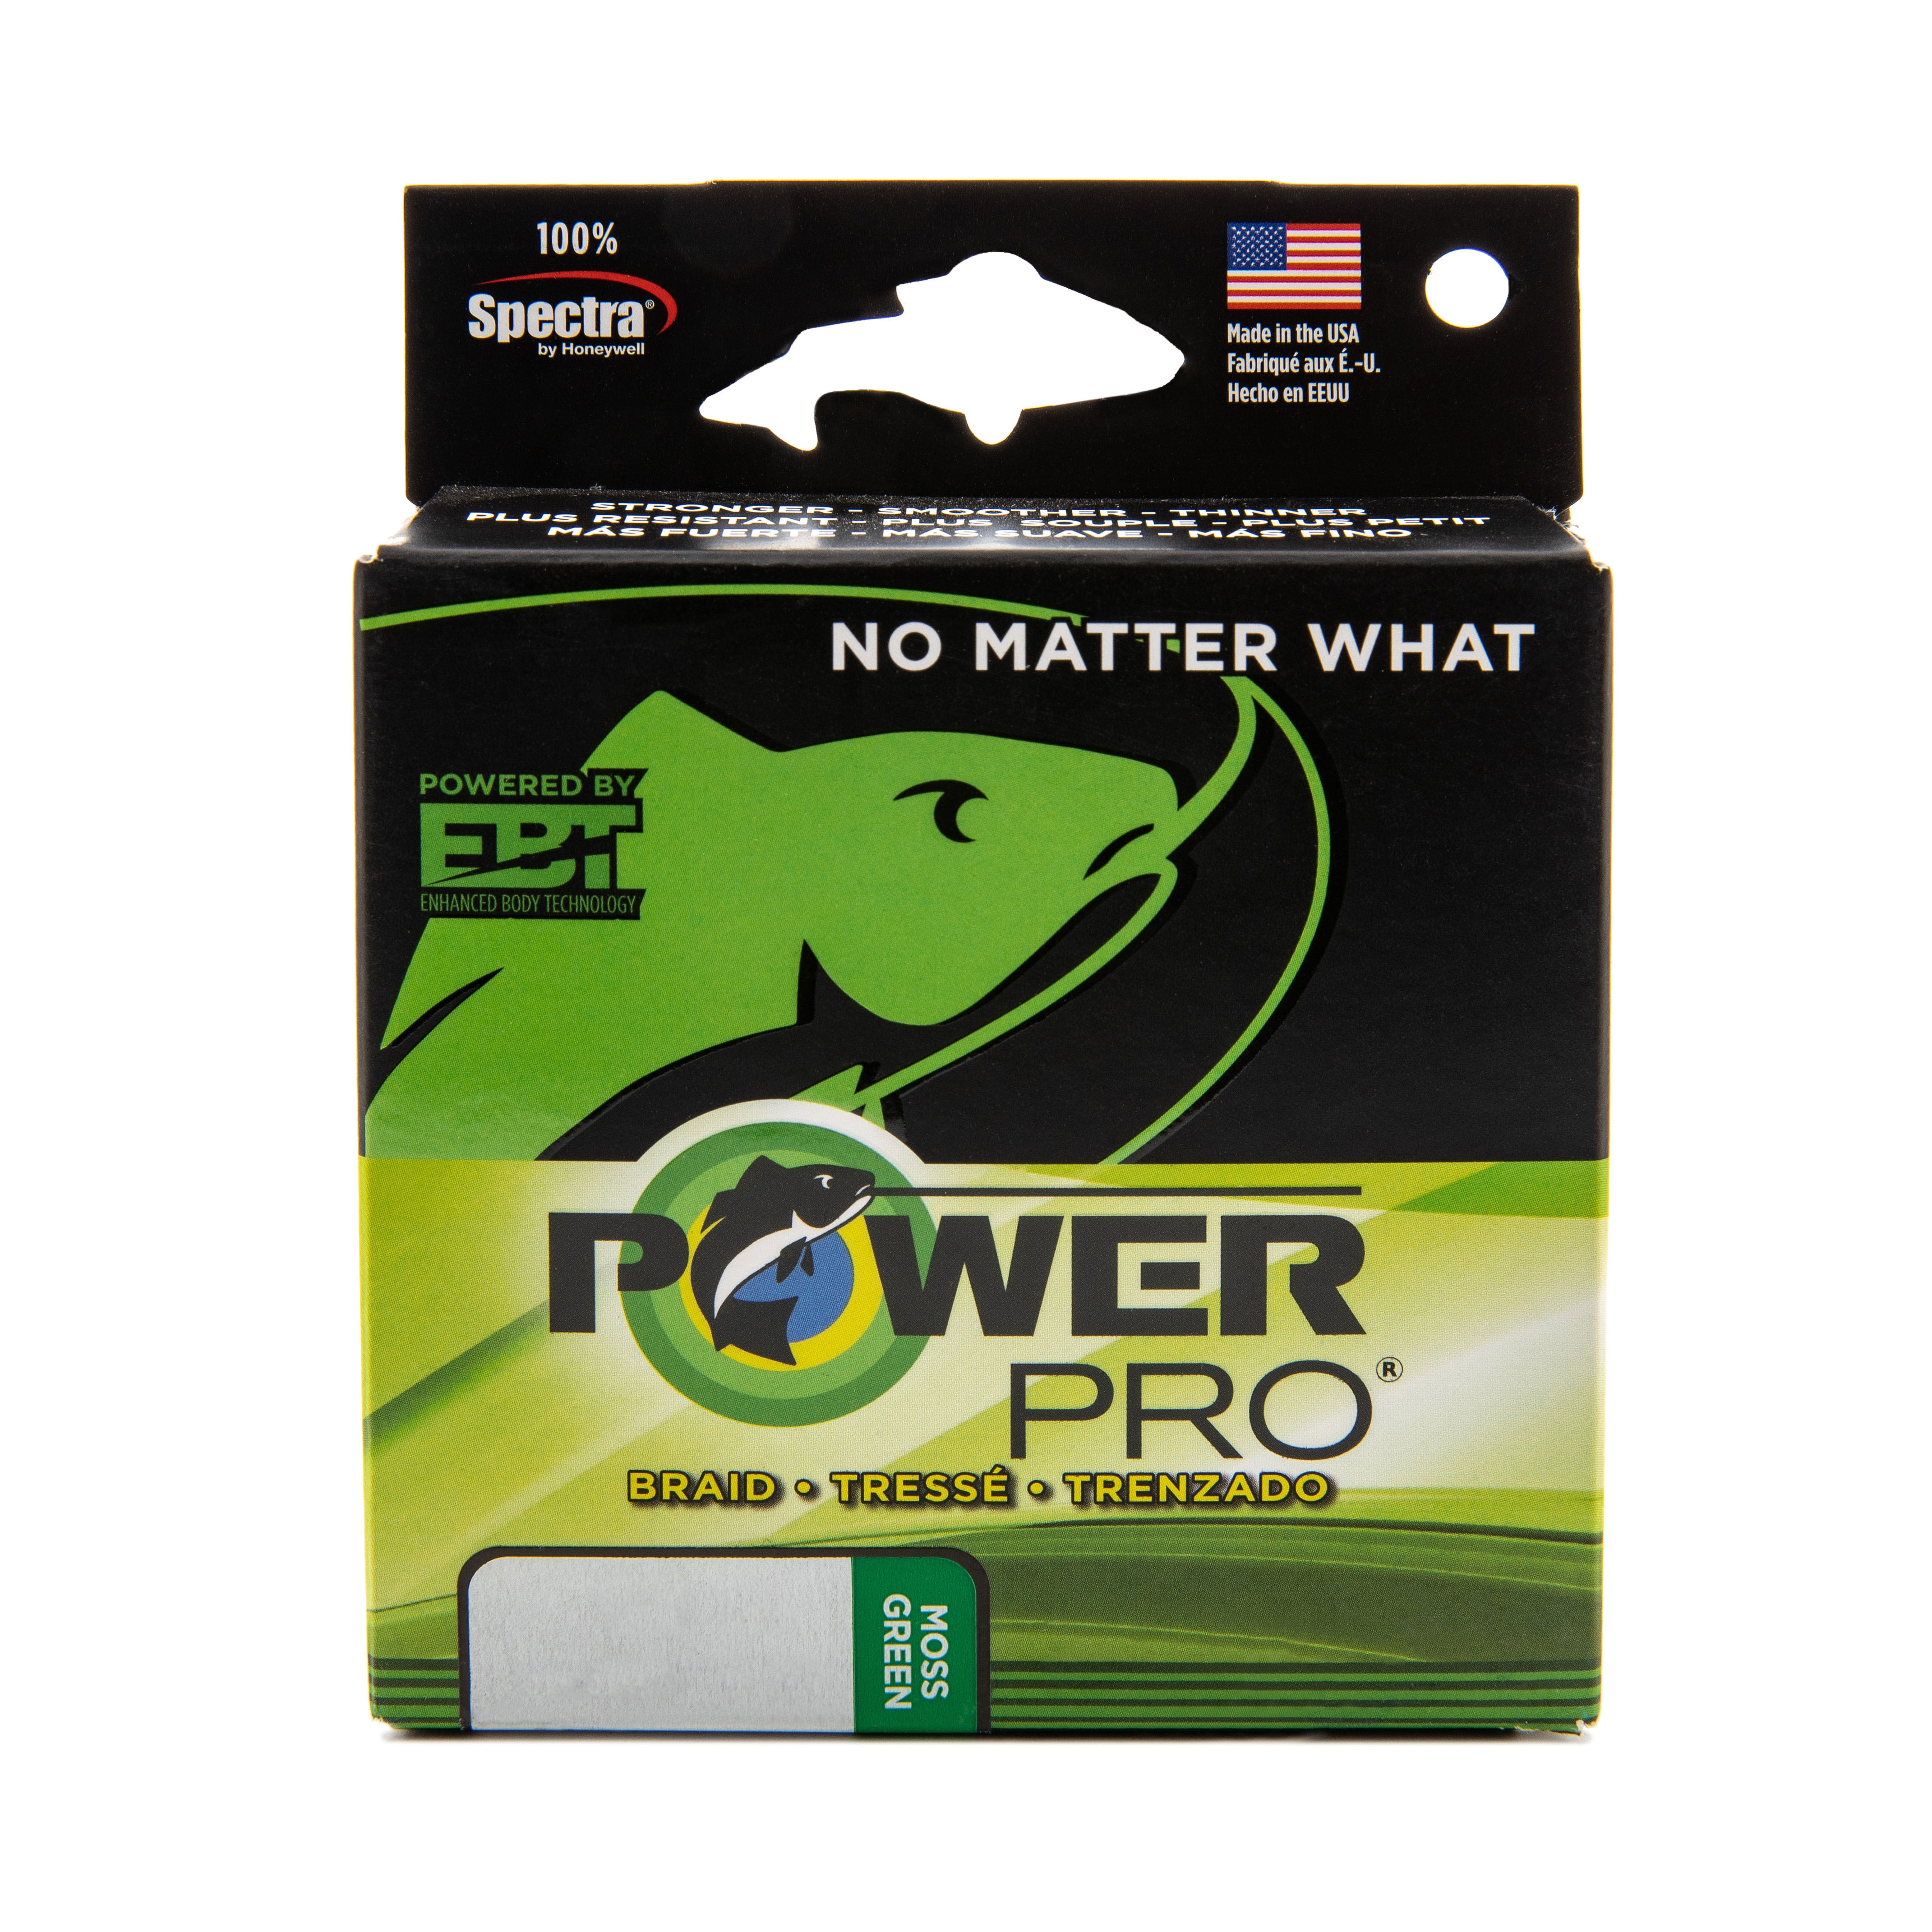 Power Pro Spectra Braid Yellow 8 LB 500 Yards for sale online